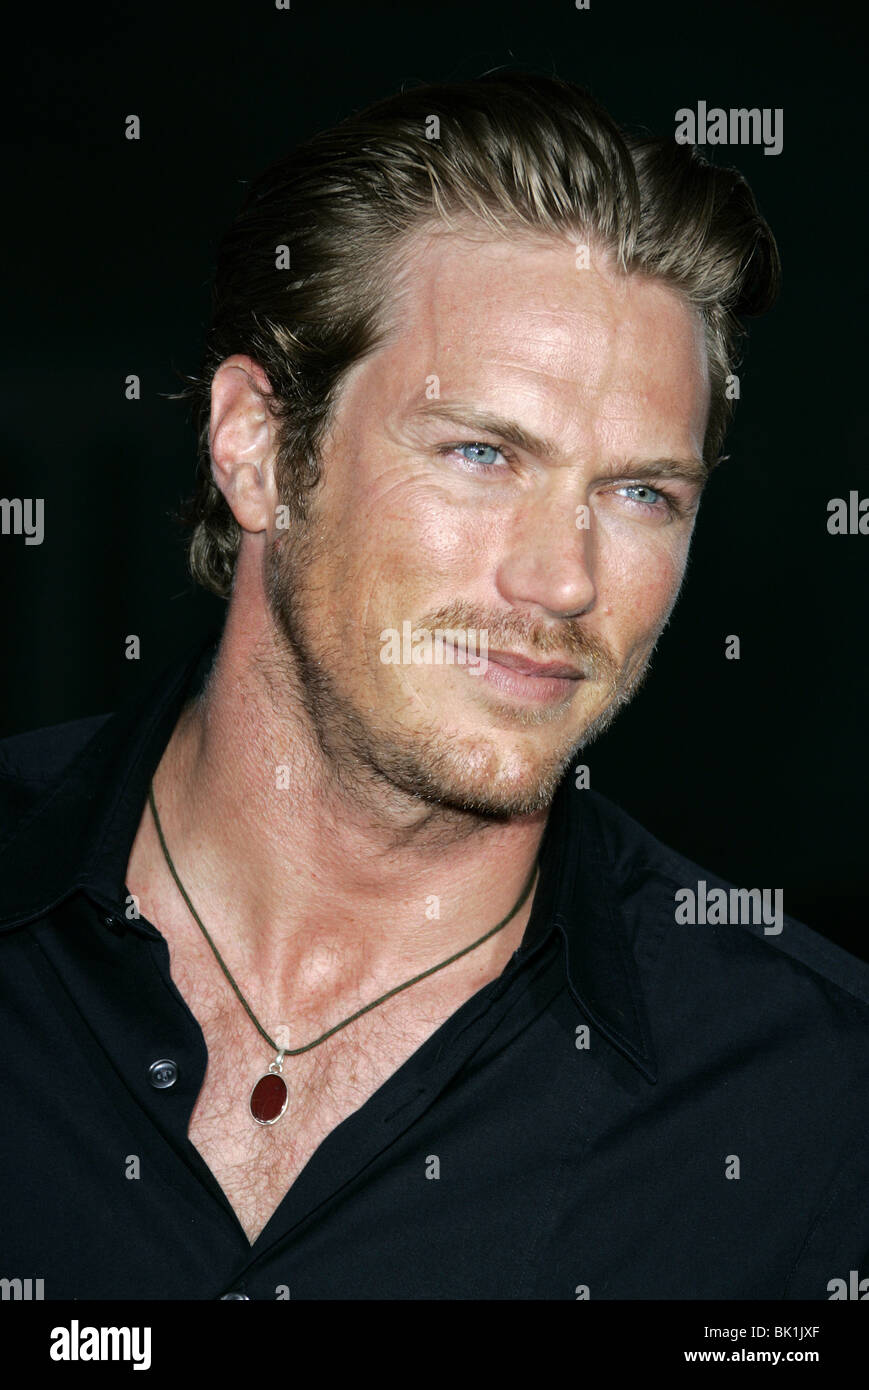 JASON LEWIS CLERKS 2 PREMIERE CINERAMA DOME HOLLYWOOD LOS ANGELES USA 11 July 2006 Stock Photo